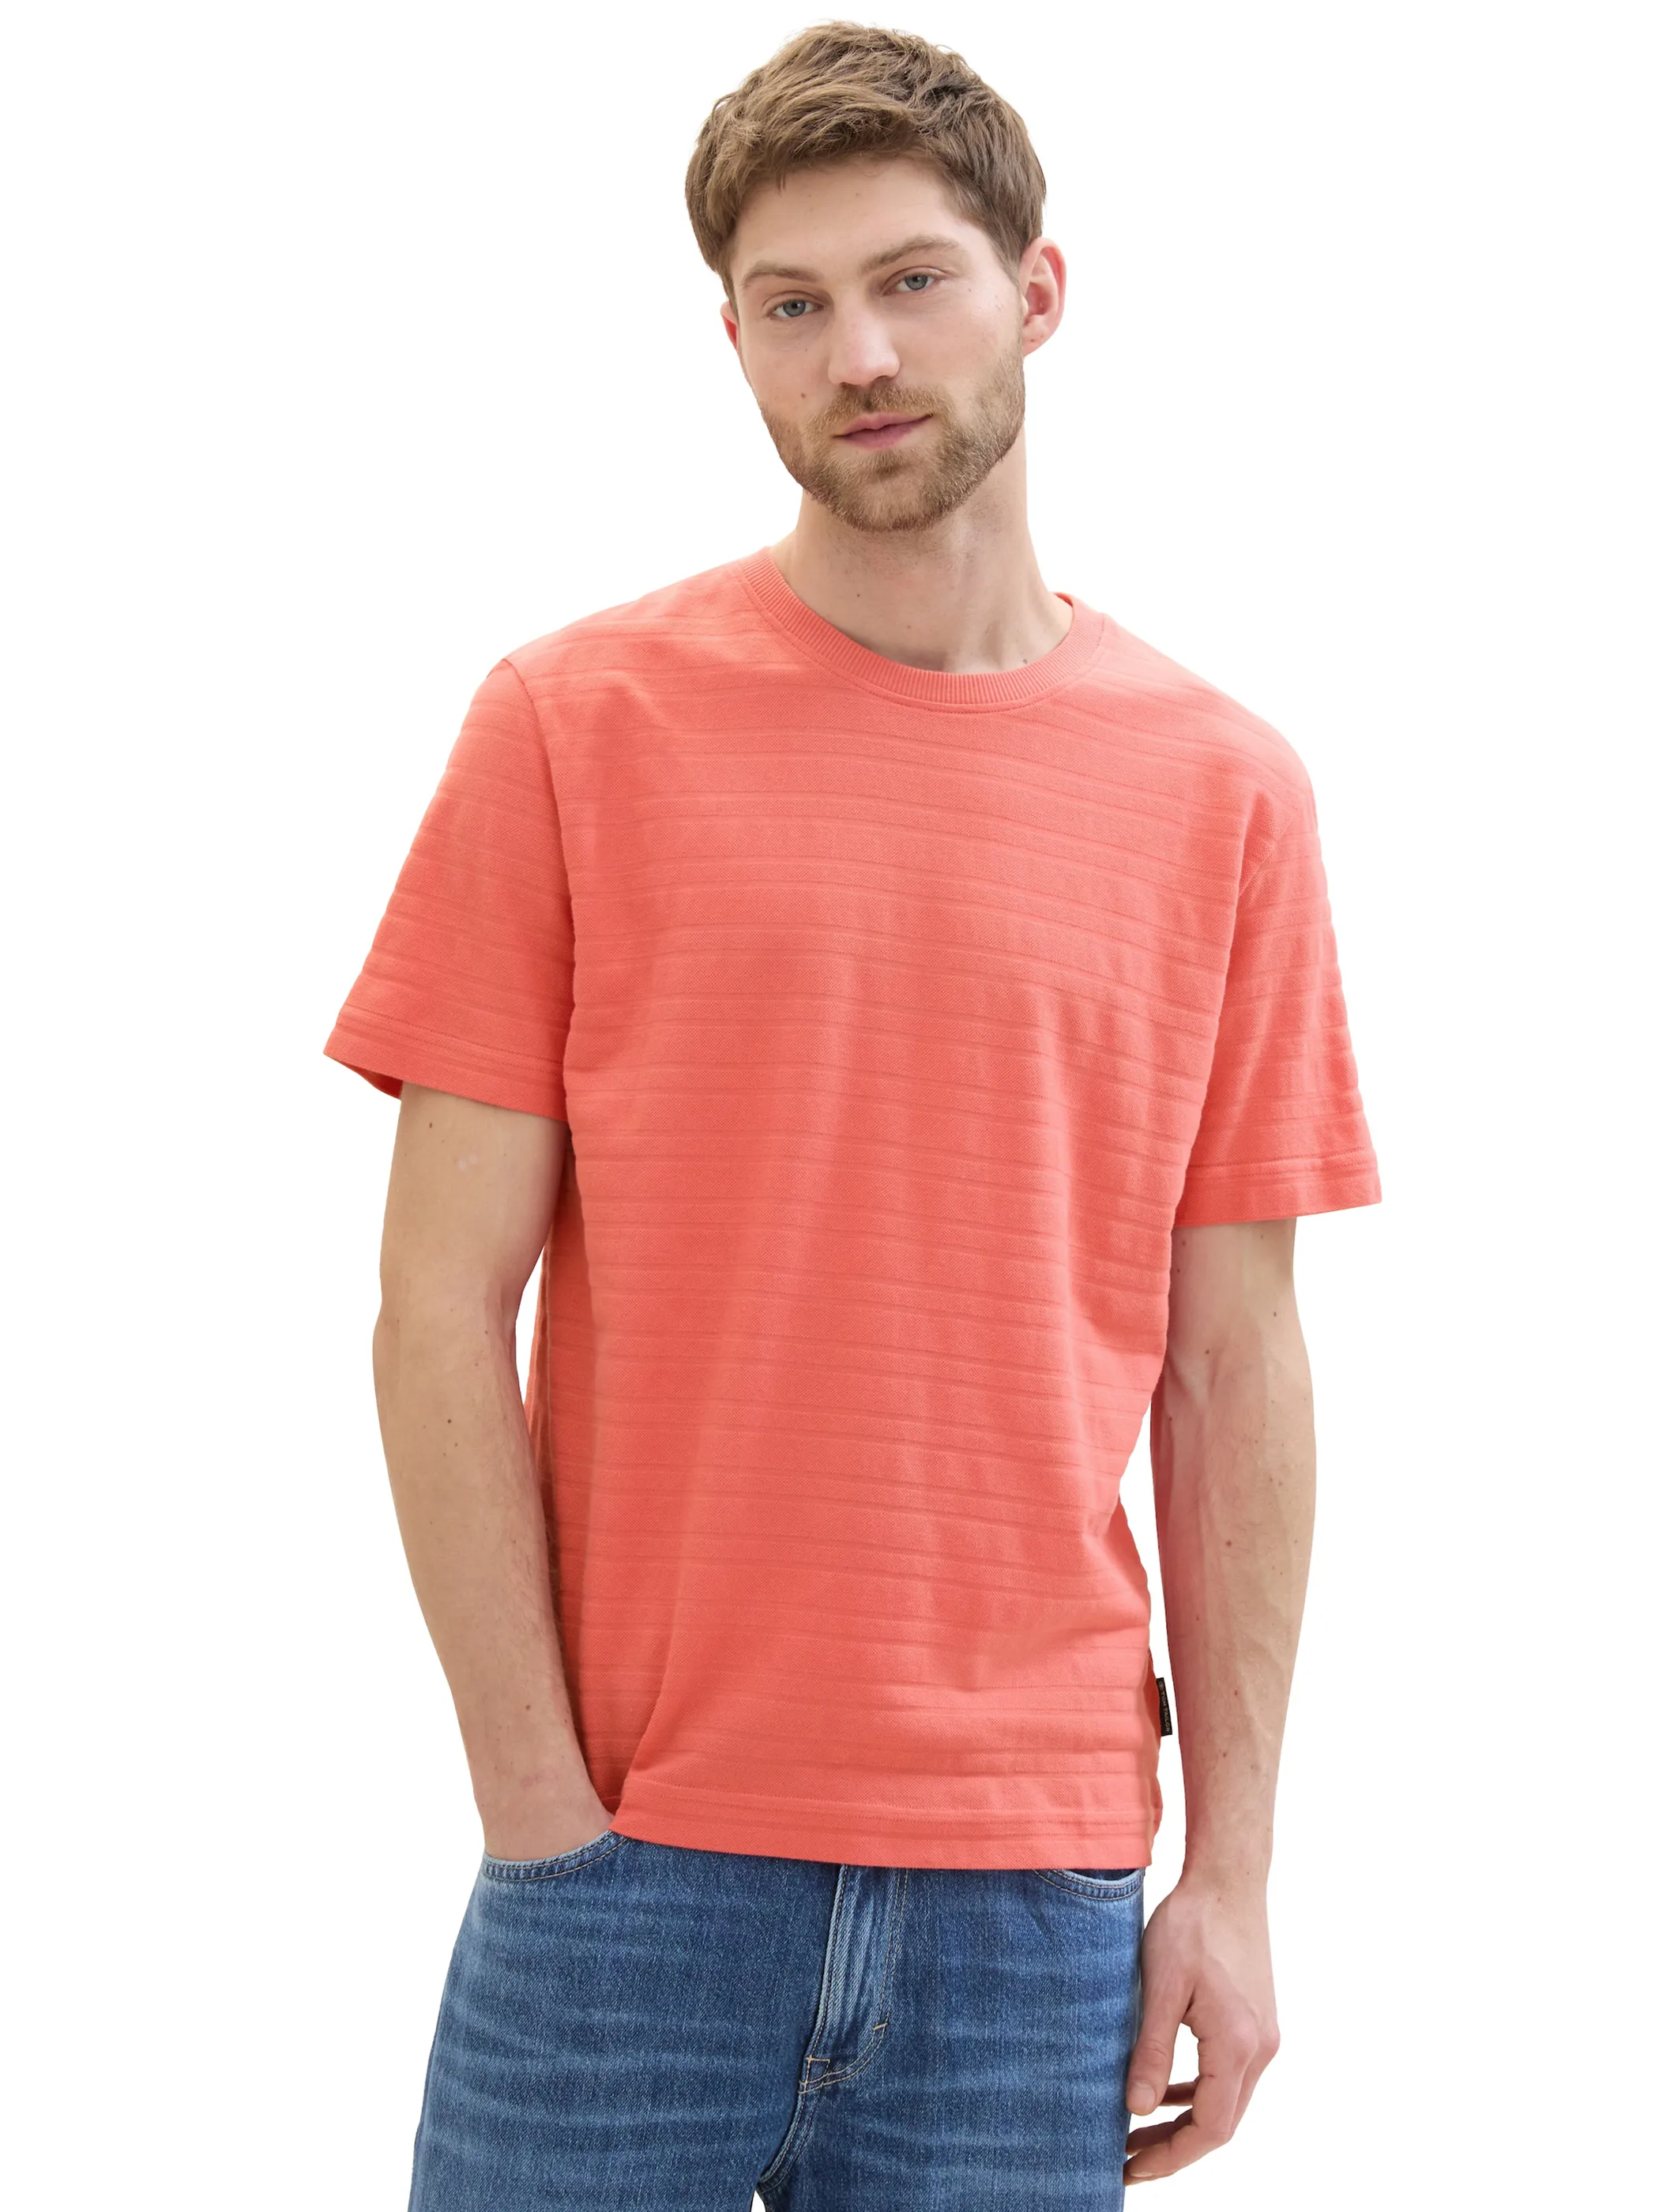 Tom Tailor 1042131 structured t-shirt Pink 895628 26202 4